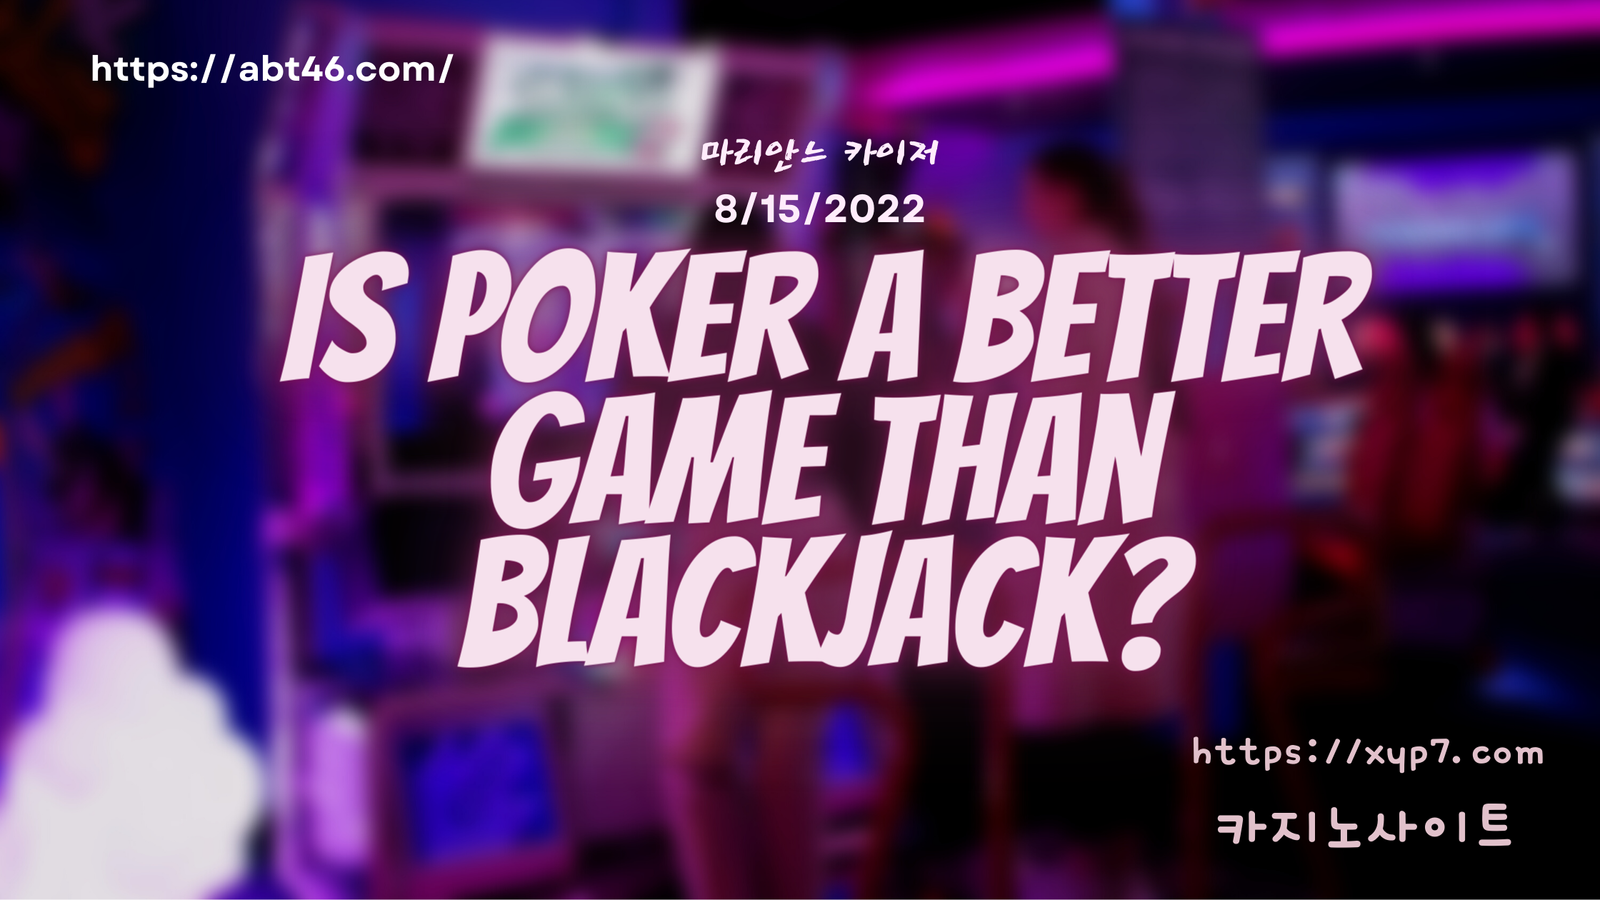 Is Poker a Better Game than Blackjack